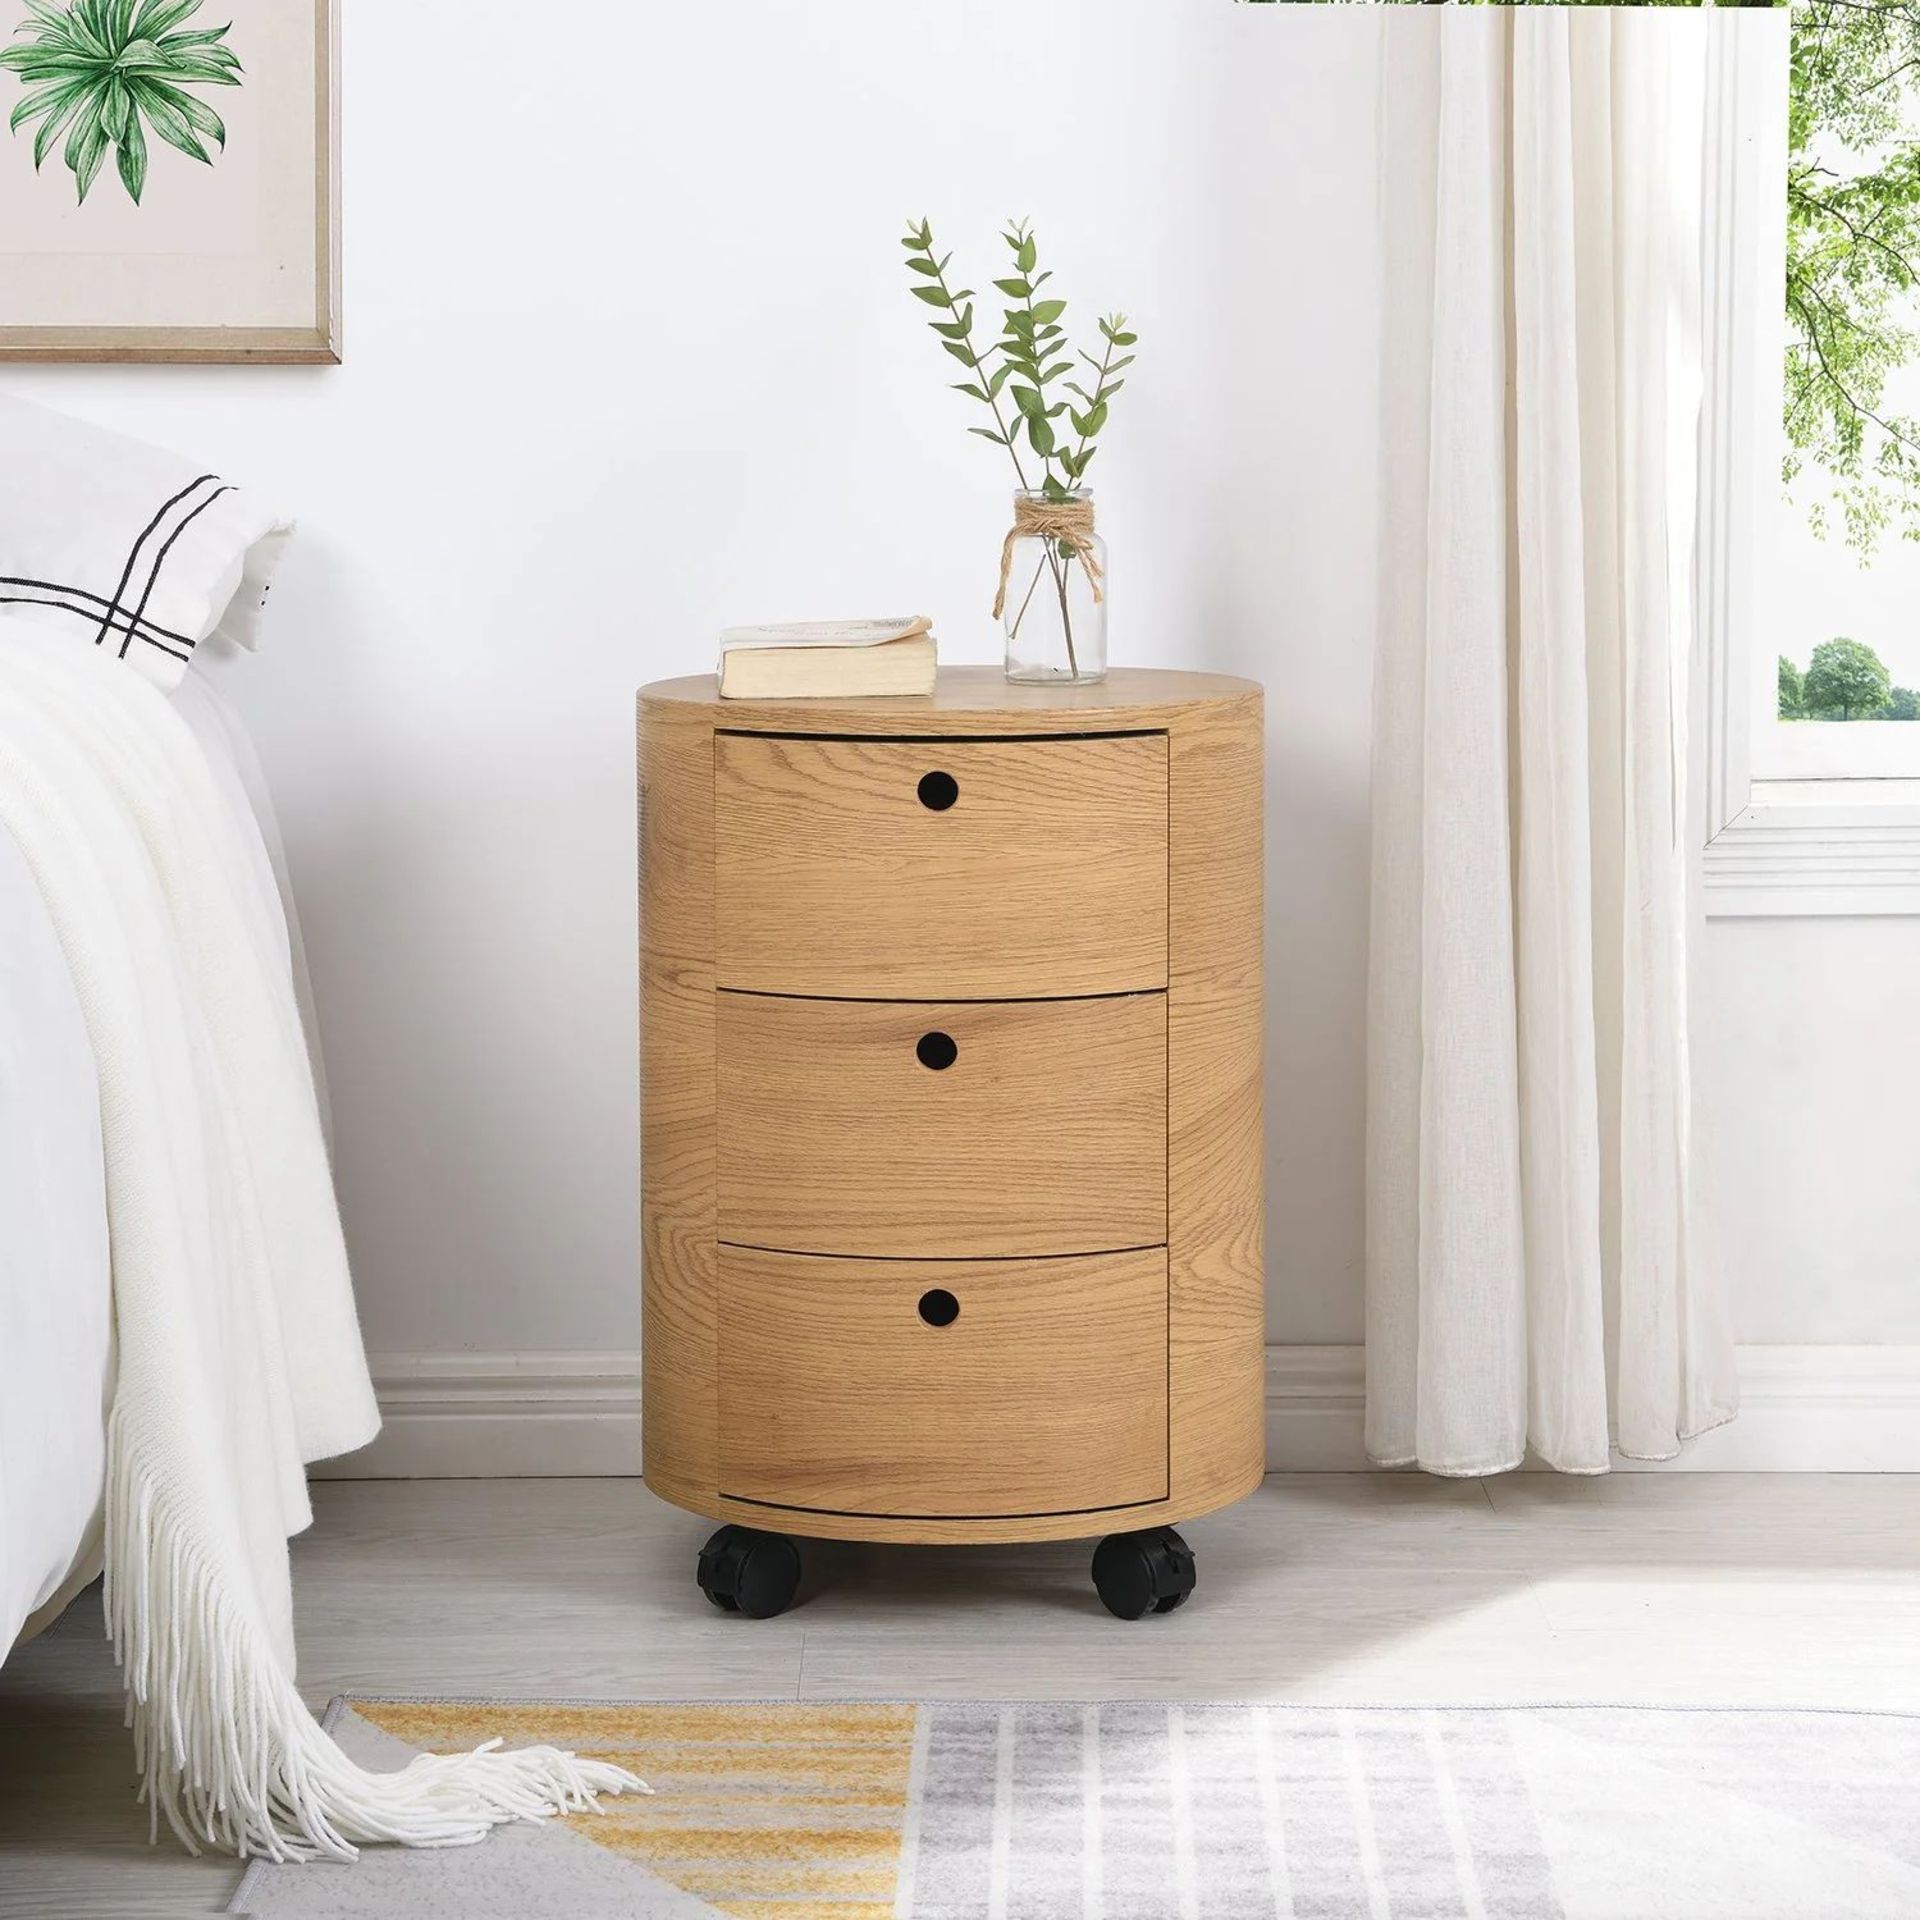 DOLIO Drum Chest Bedside Table, Barrel Side Table with Drawers Oak 3 Drawer. - R19.1. RRP £219.99.